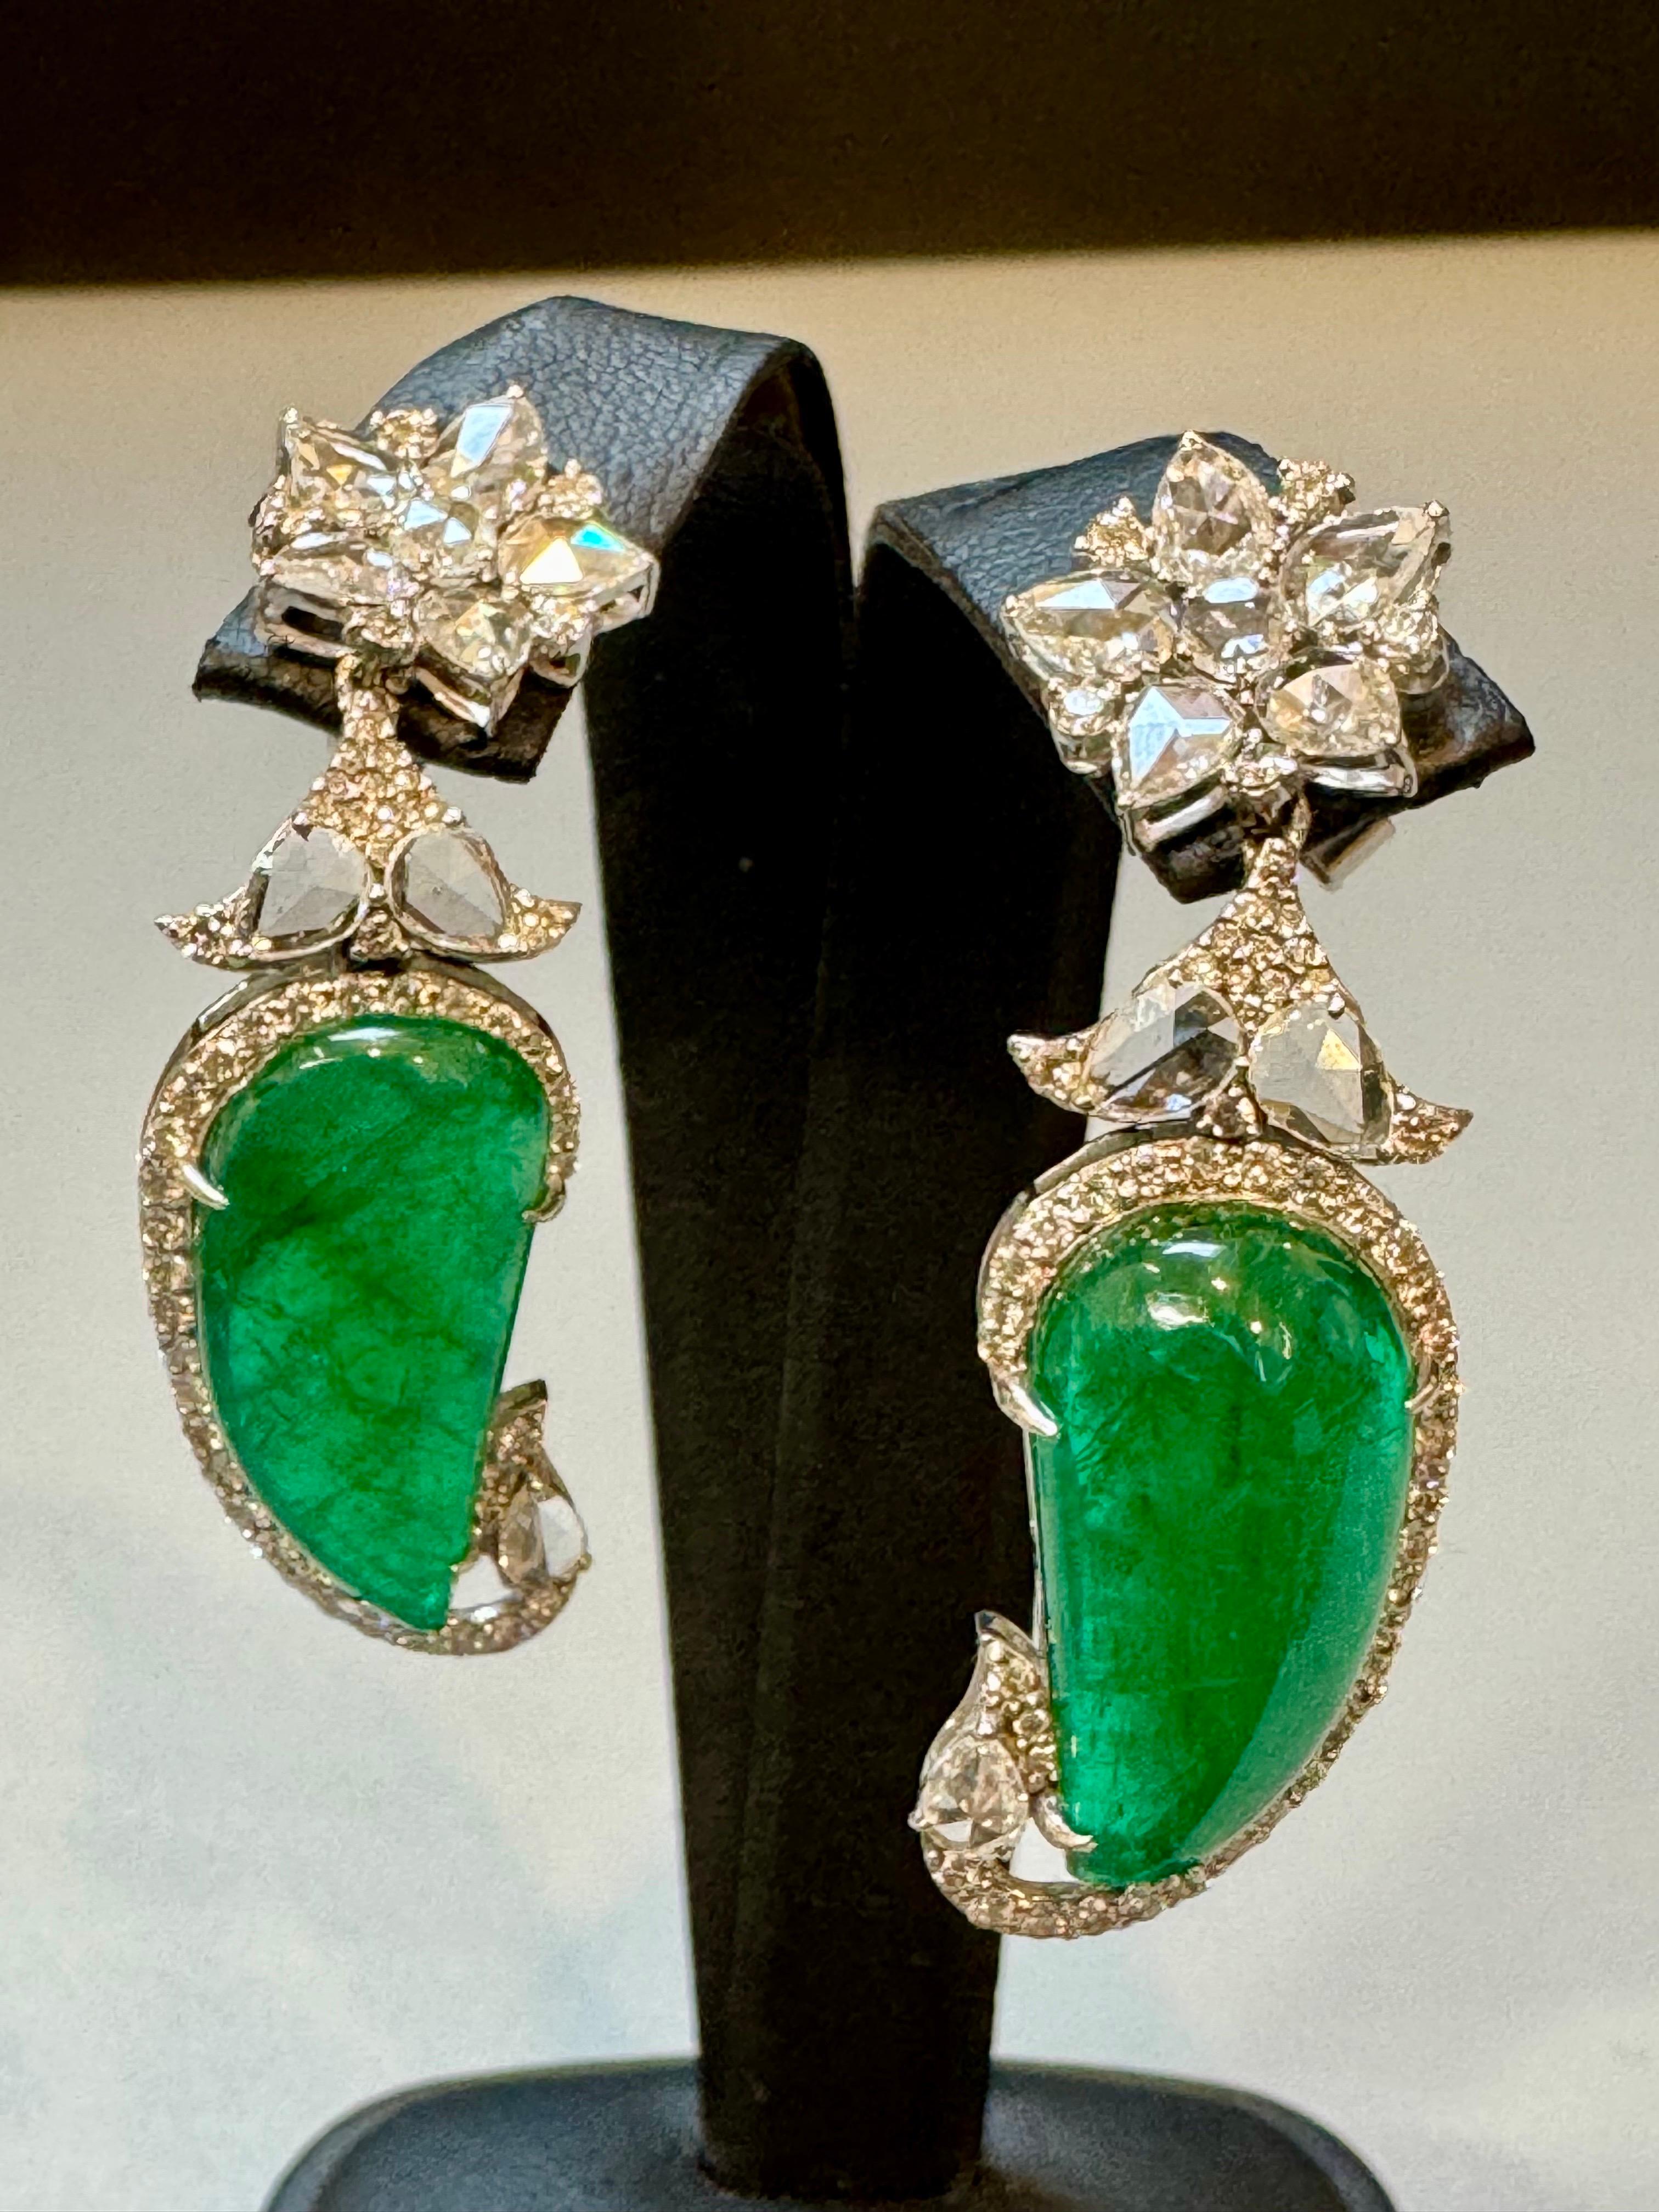 20 Ct Fine Emerald Cabochon & 4 Ct Rose Cut Diamond  18 Kt White Gold  Earrings For Sale 9